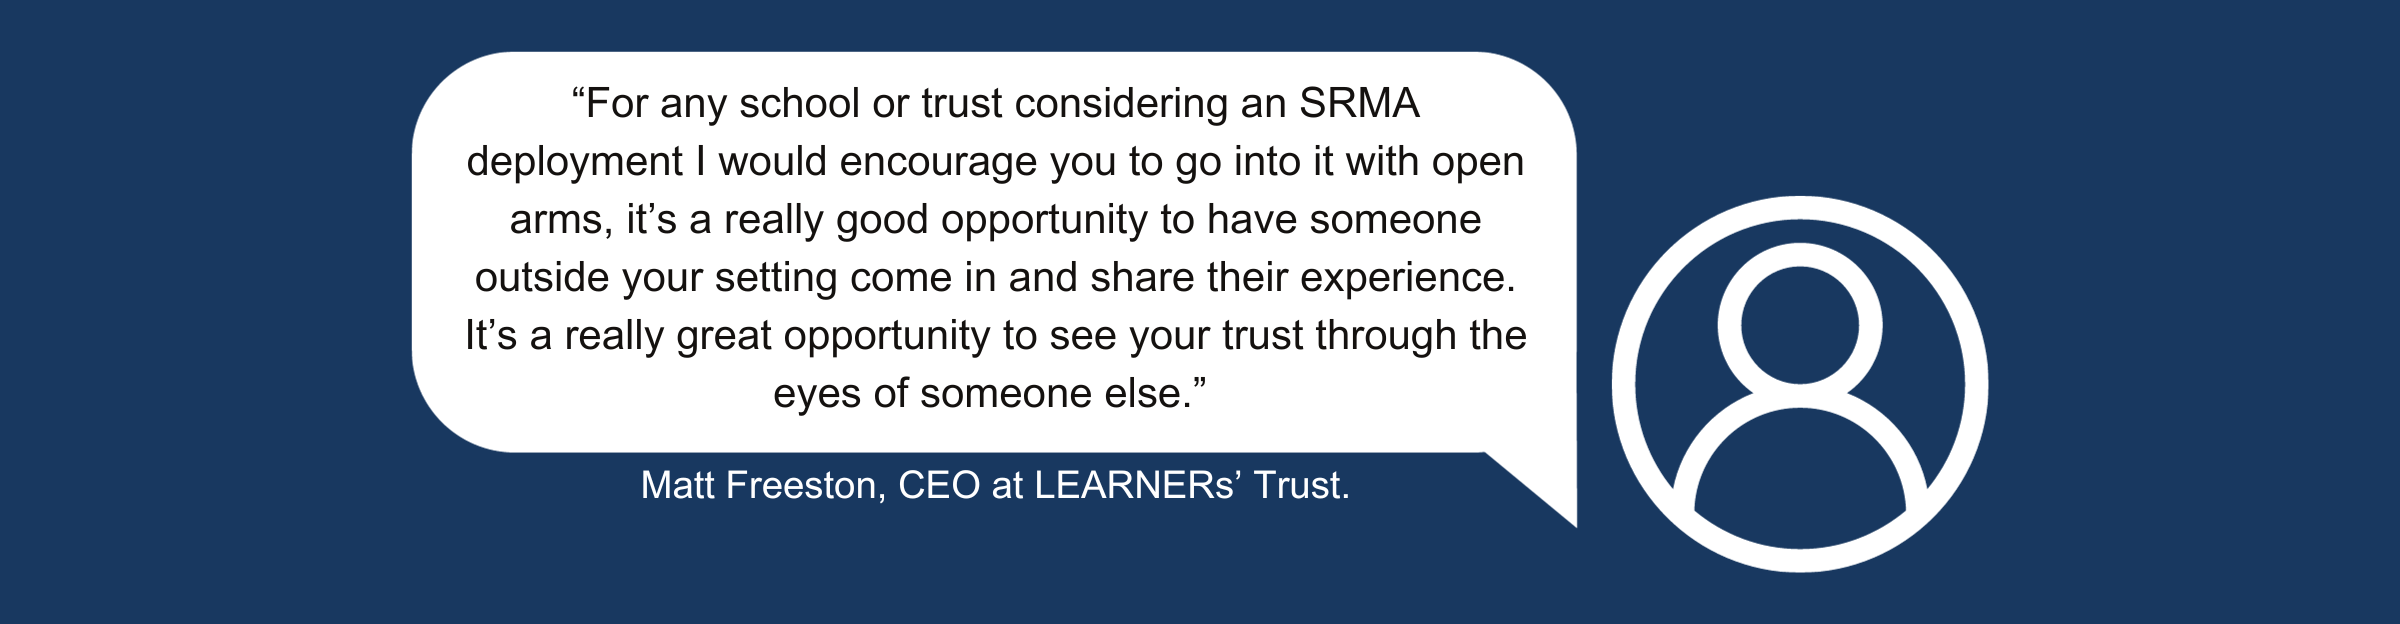 A quote from Matt Freeston, CEO at LEARNERs’ Trust, which reads: “For any school or trust considering an SRMA deployment I would encourage you go into it with open arms, it’s a really good opportunity to have someone outside your setting come in and share their experience. It’s a really great opportunity to see your trust through the eyes of someone else.”